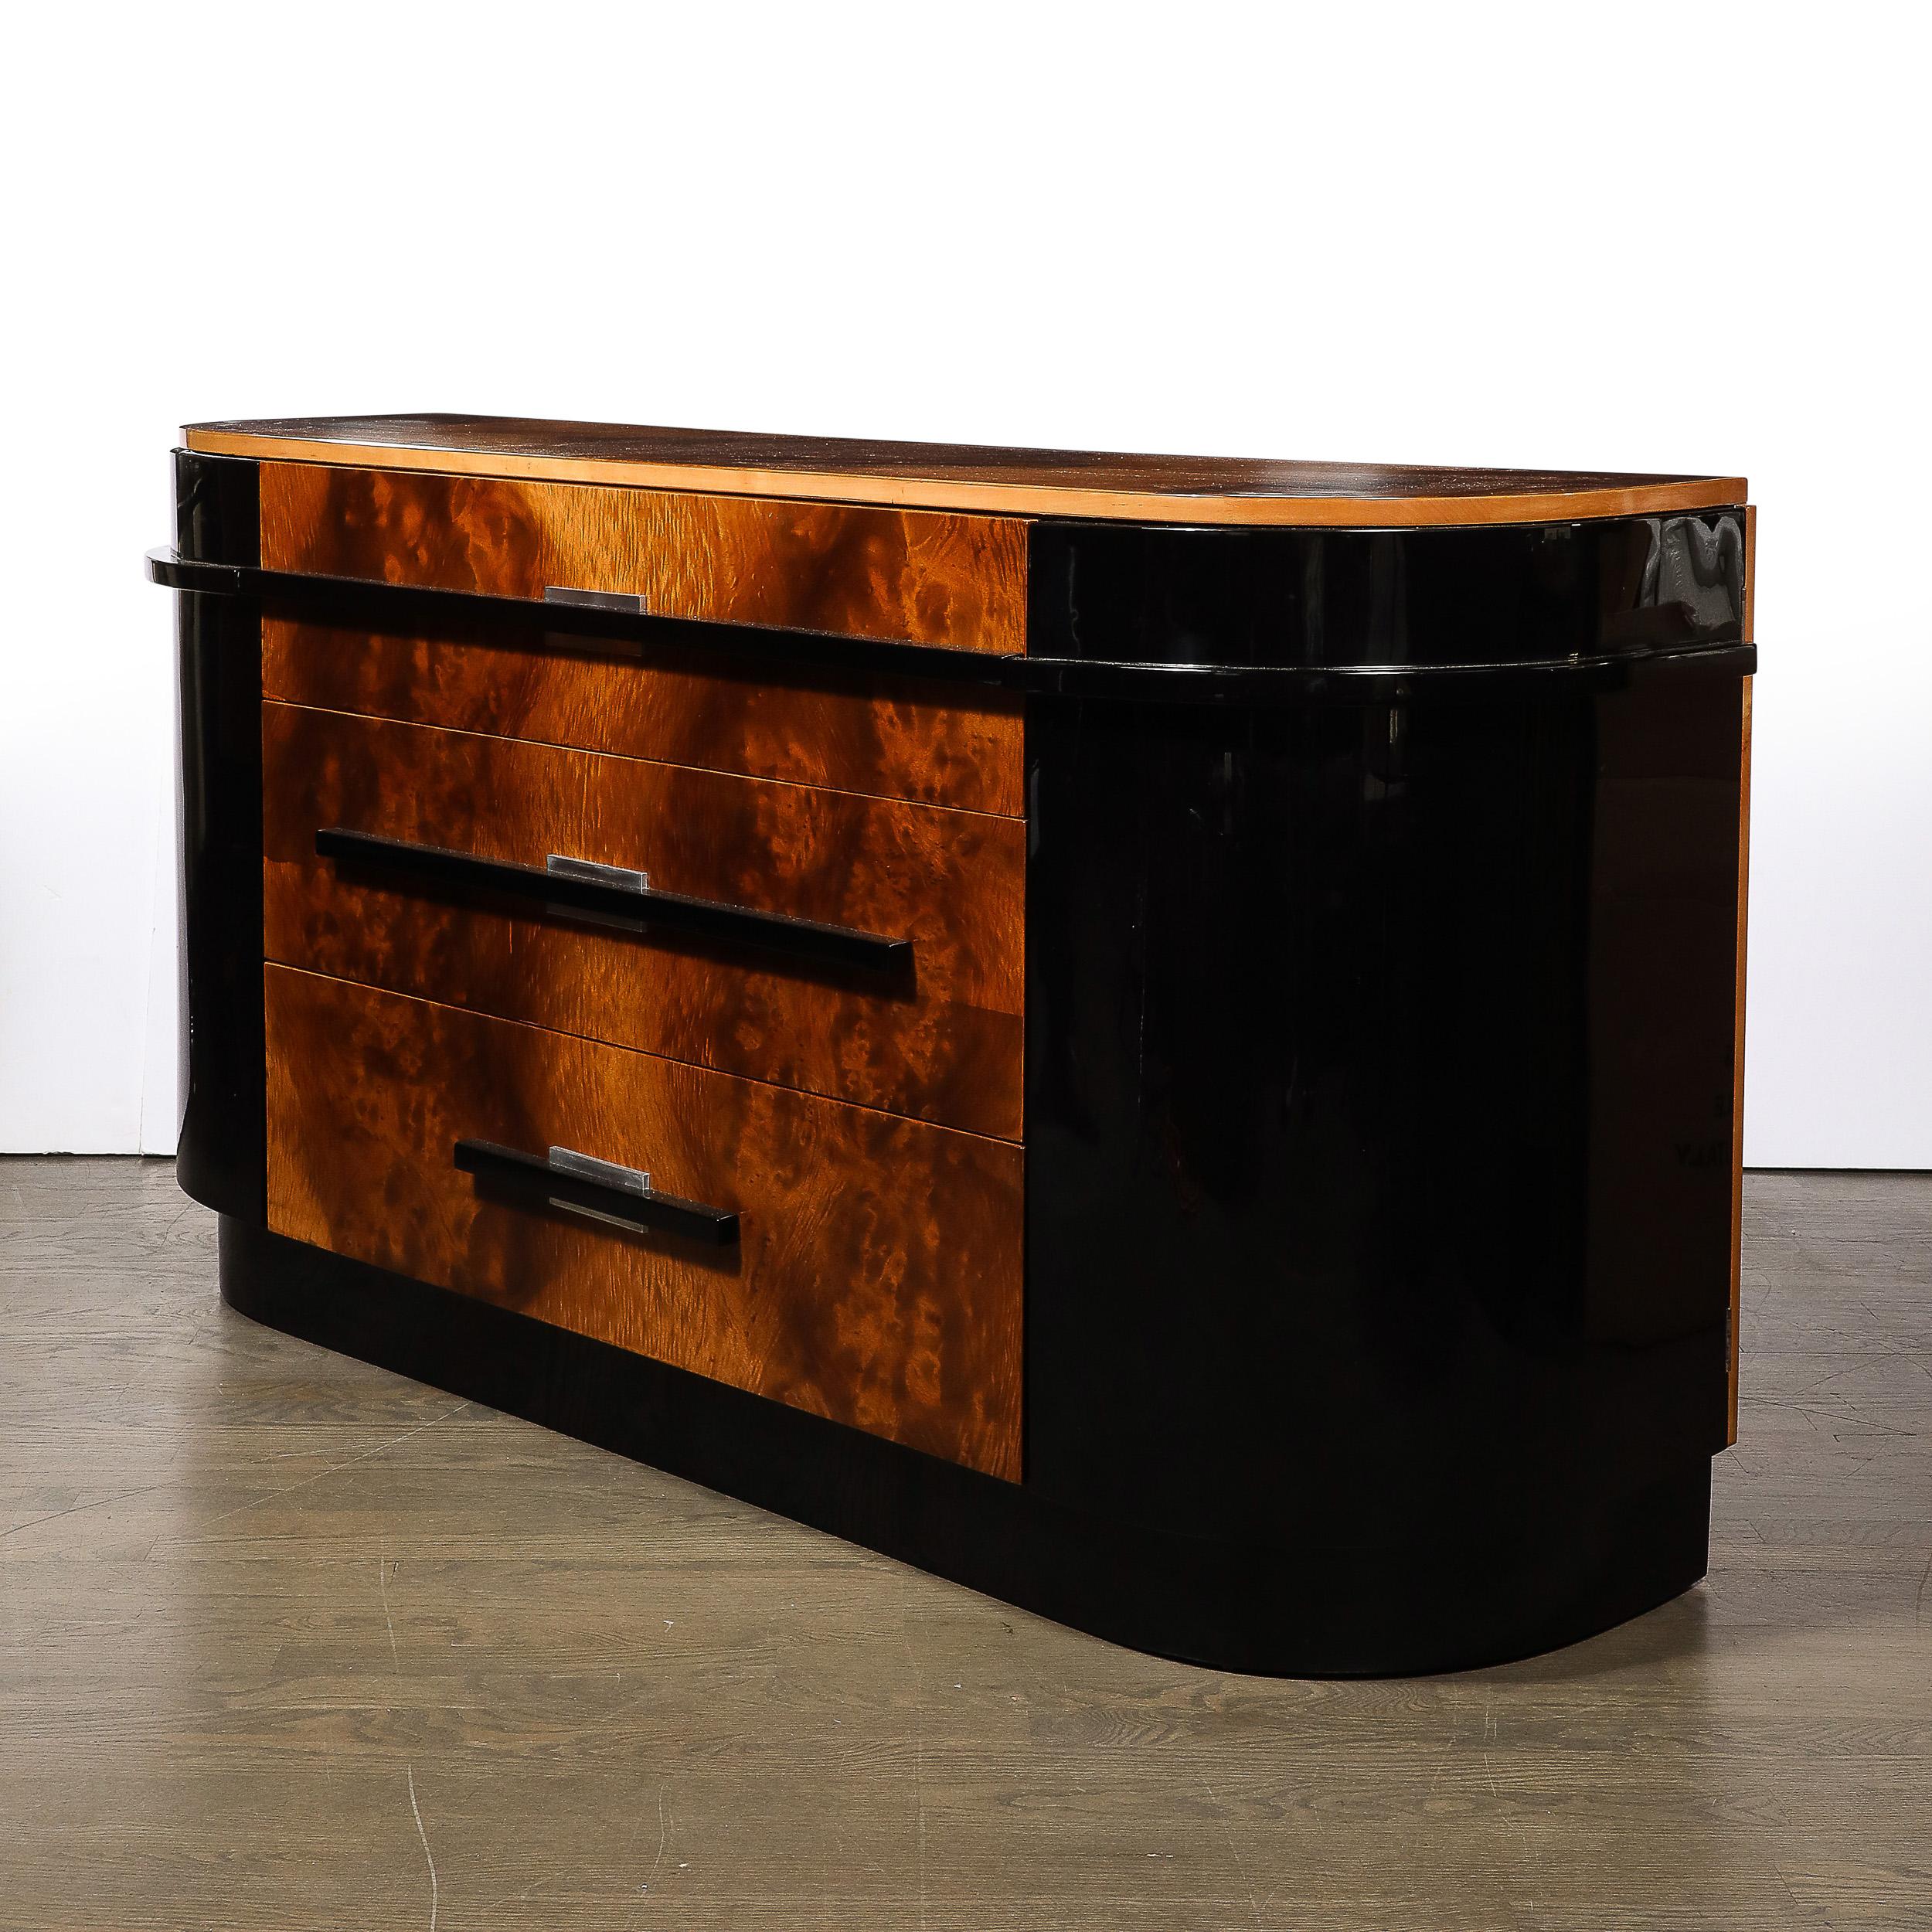 Mid-20th Century Art Deco Burled Walnut Sideboard by Donald Deskey for the Hastings Company For Sale